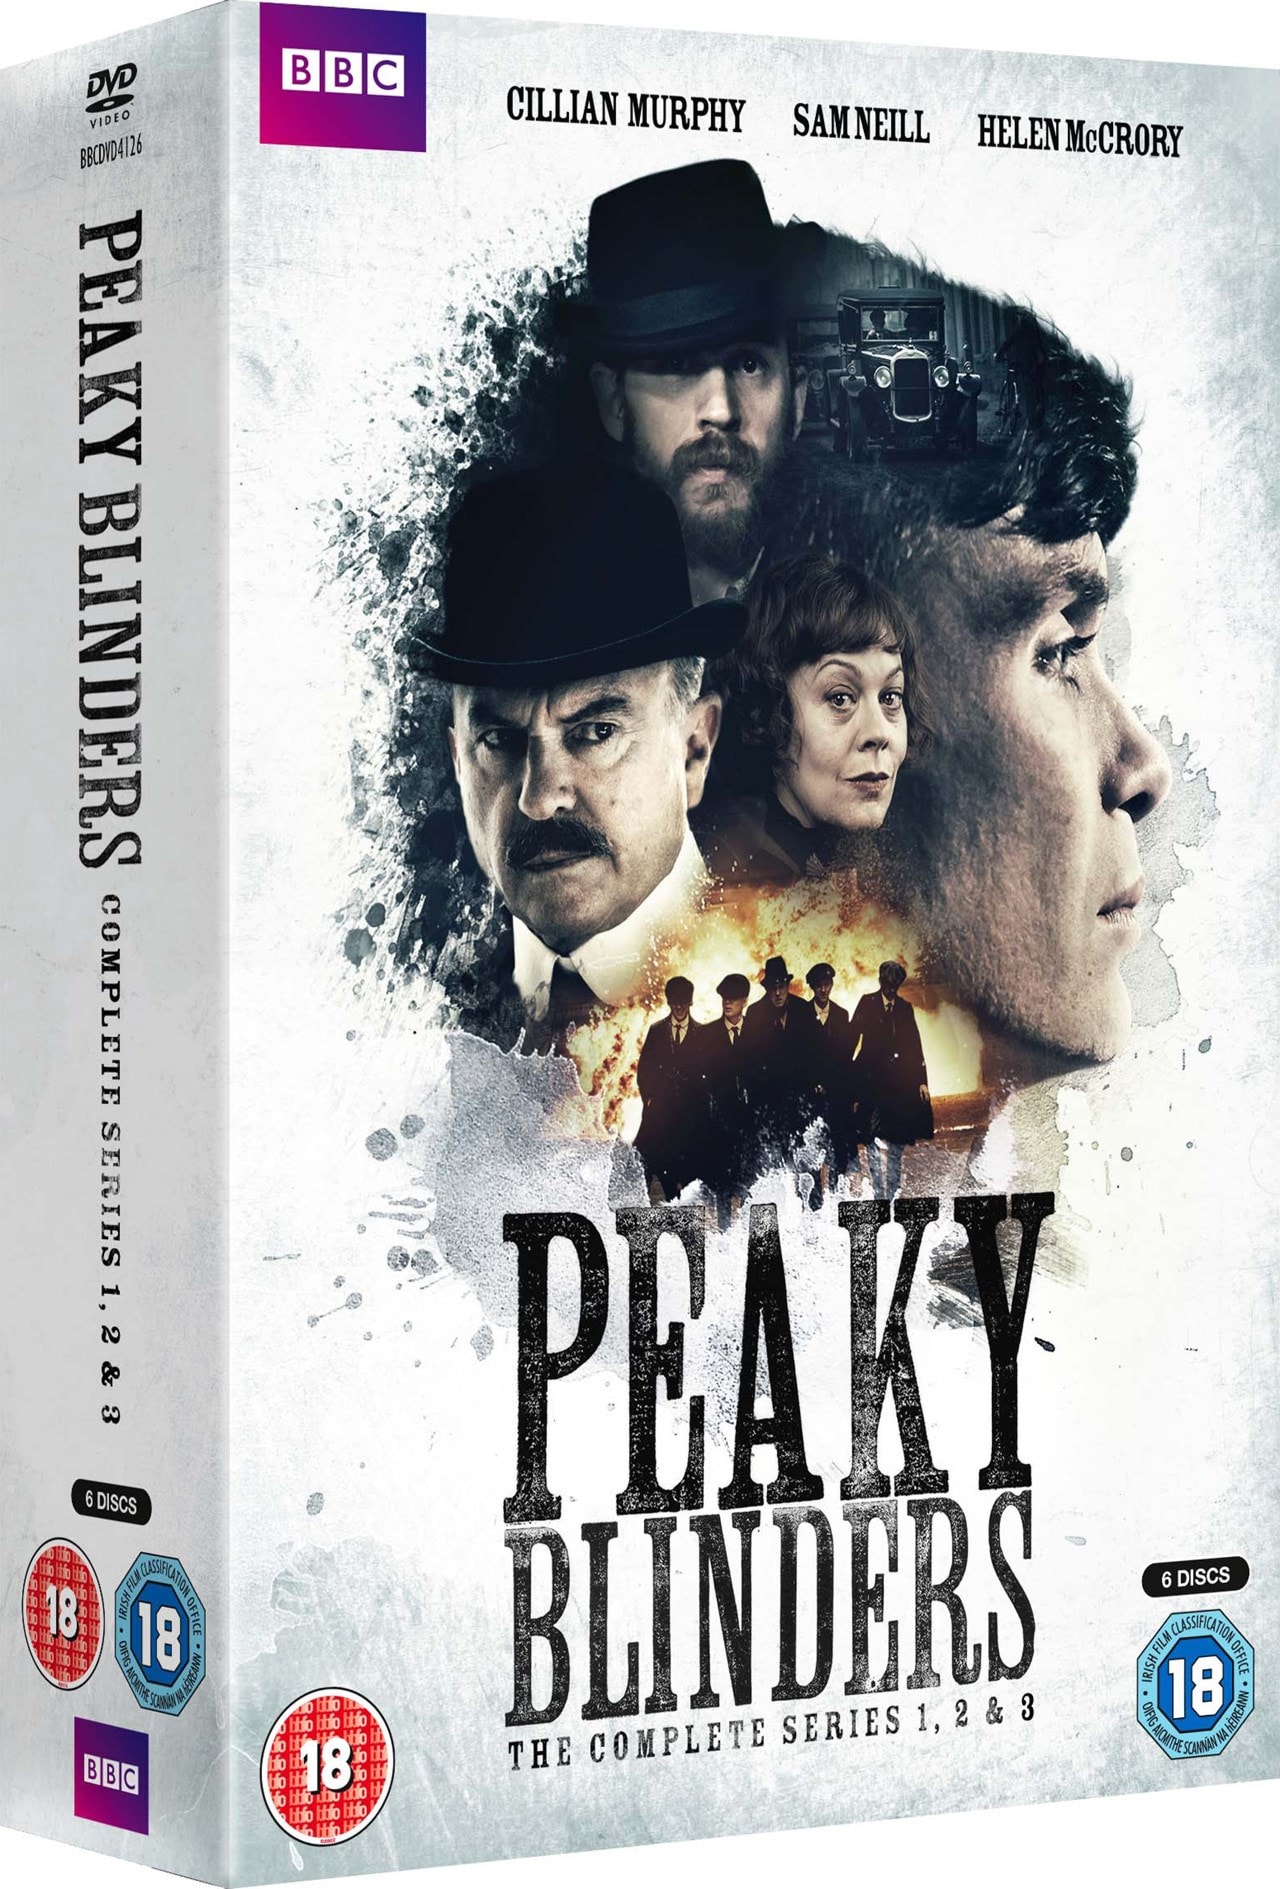 Peaky Blinders The Complete Series 1 3 Dvd Box Set Free Shipping Over £20 Hmv Store 